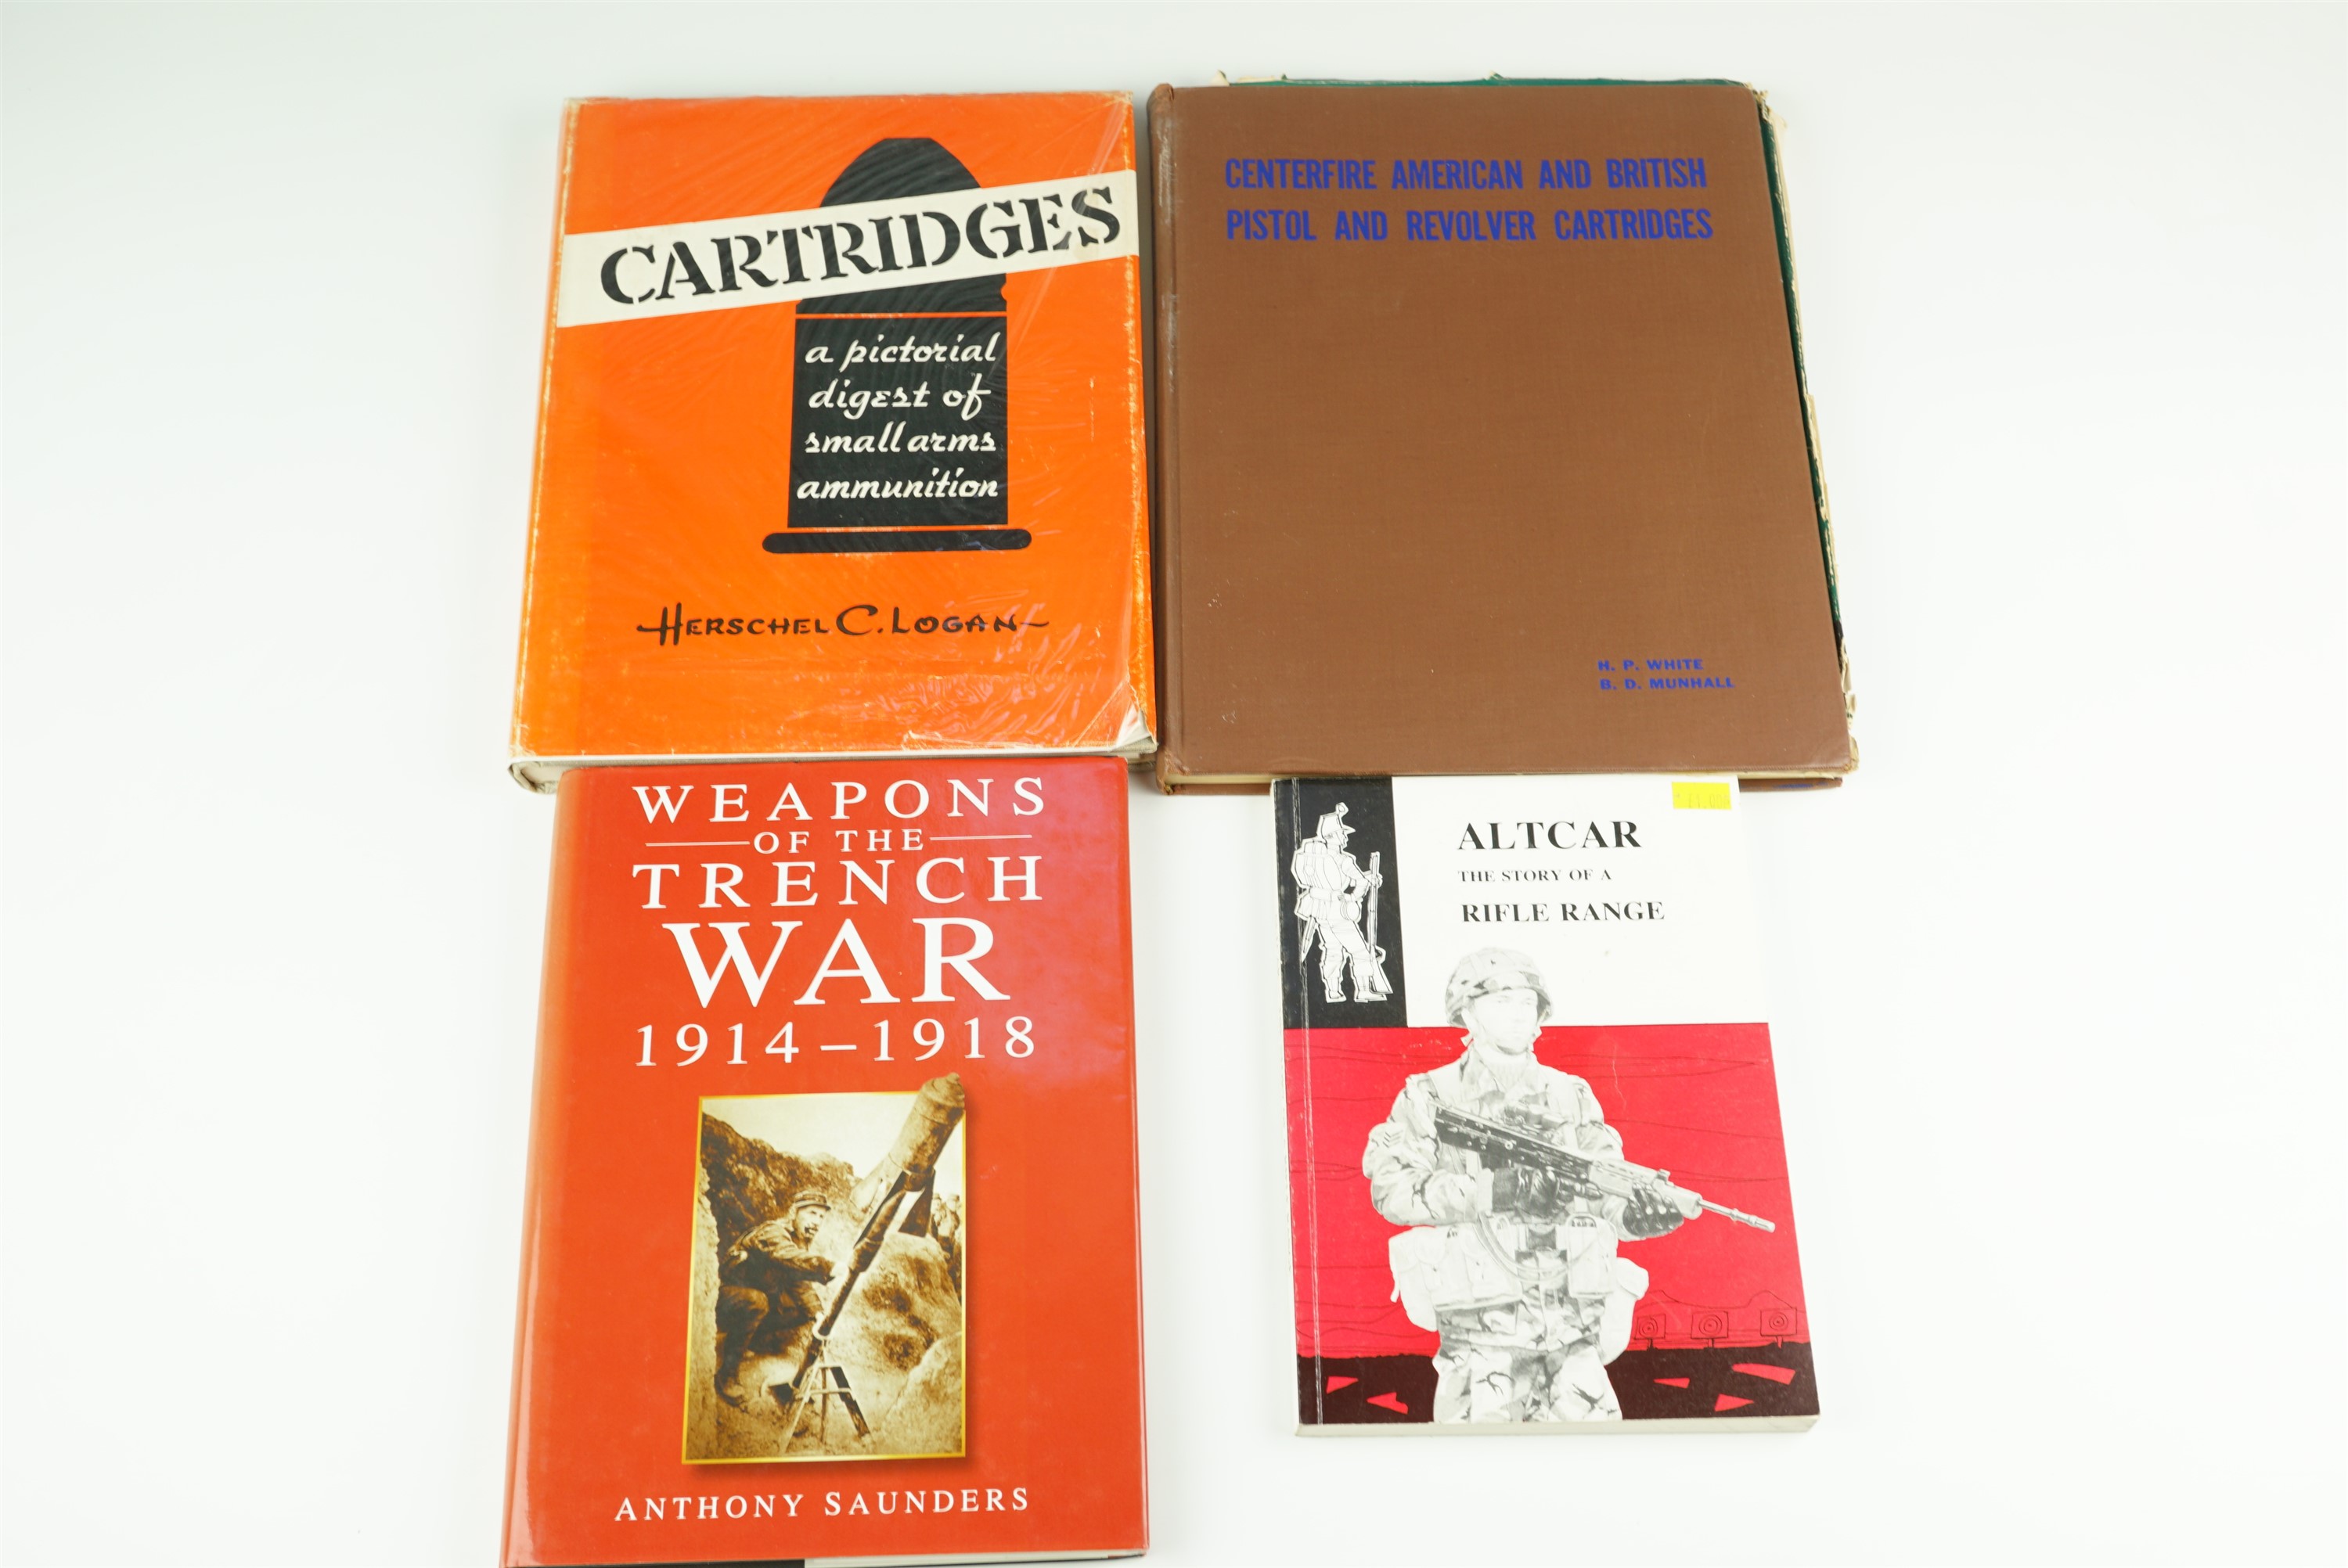 A group of books on small arms ammunition, cartridge collecting, marksmanship and weapons